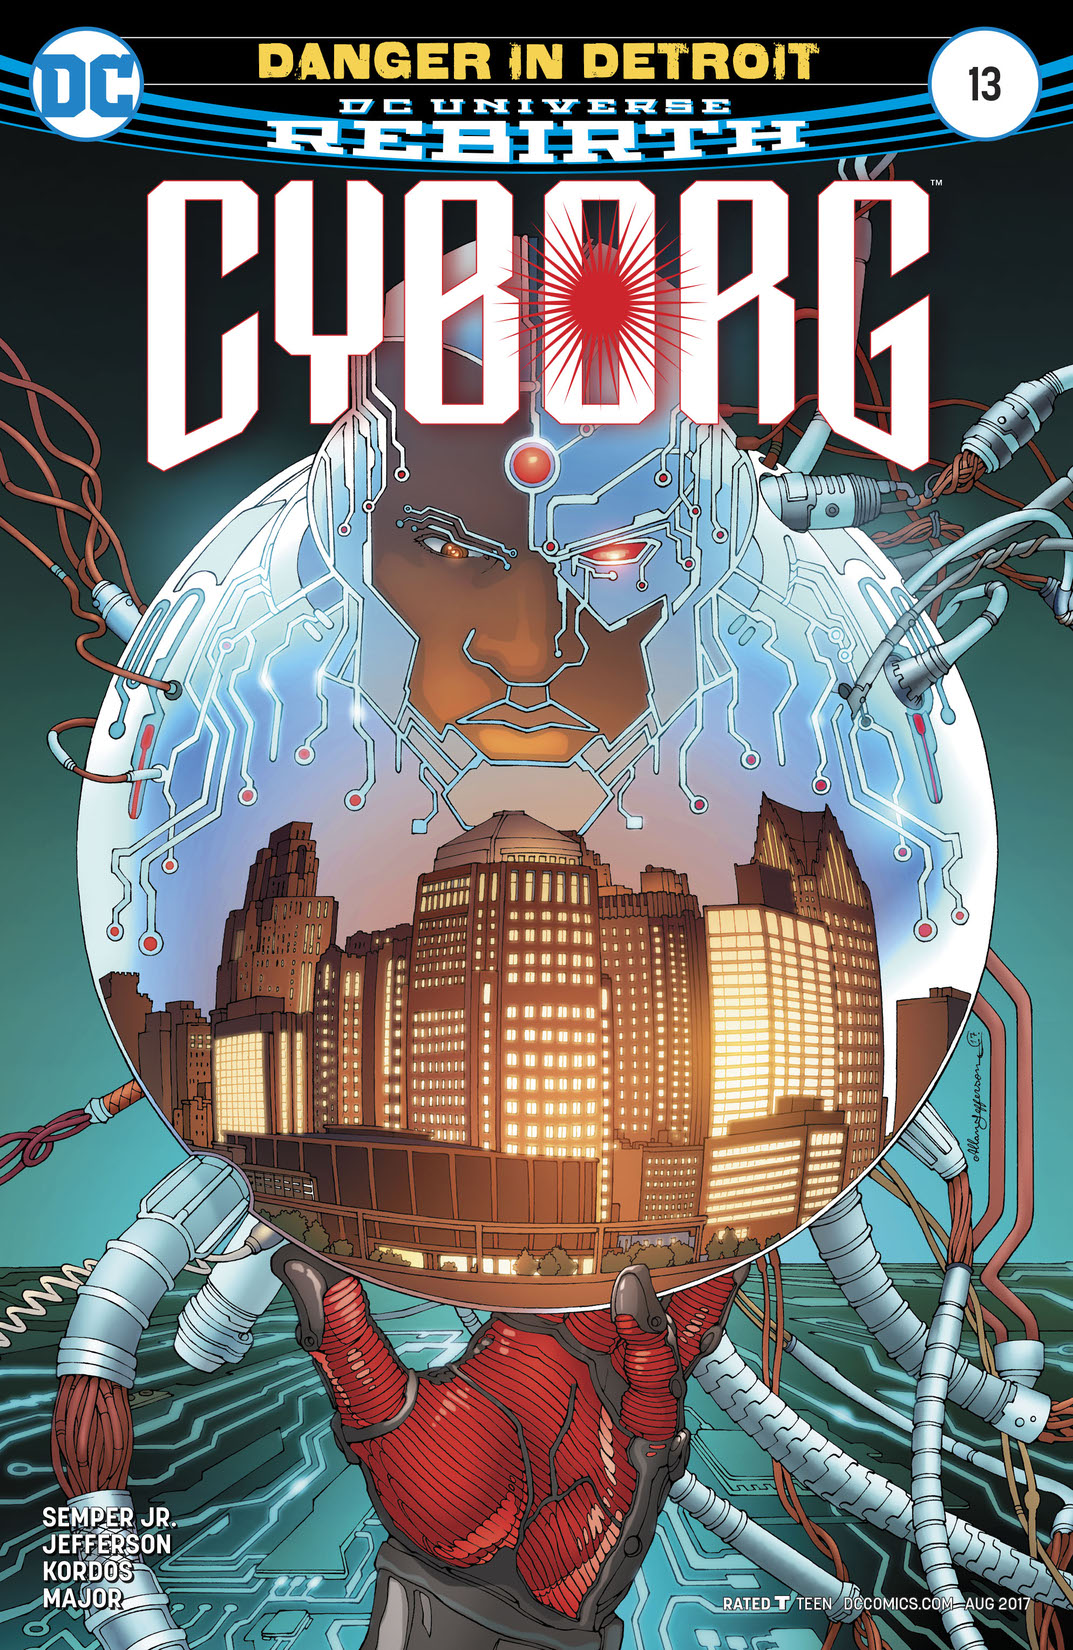 Cyborg (2016-) #13 preview images